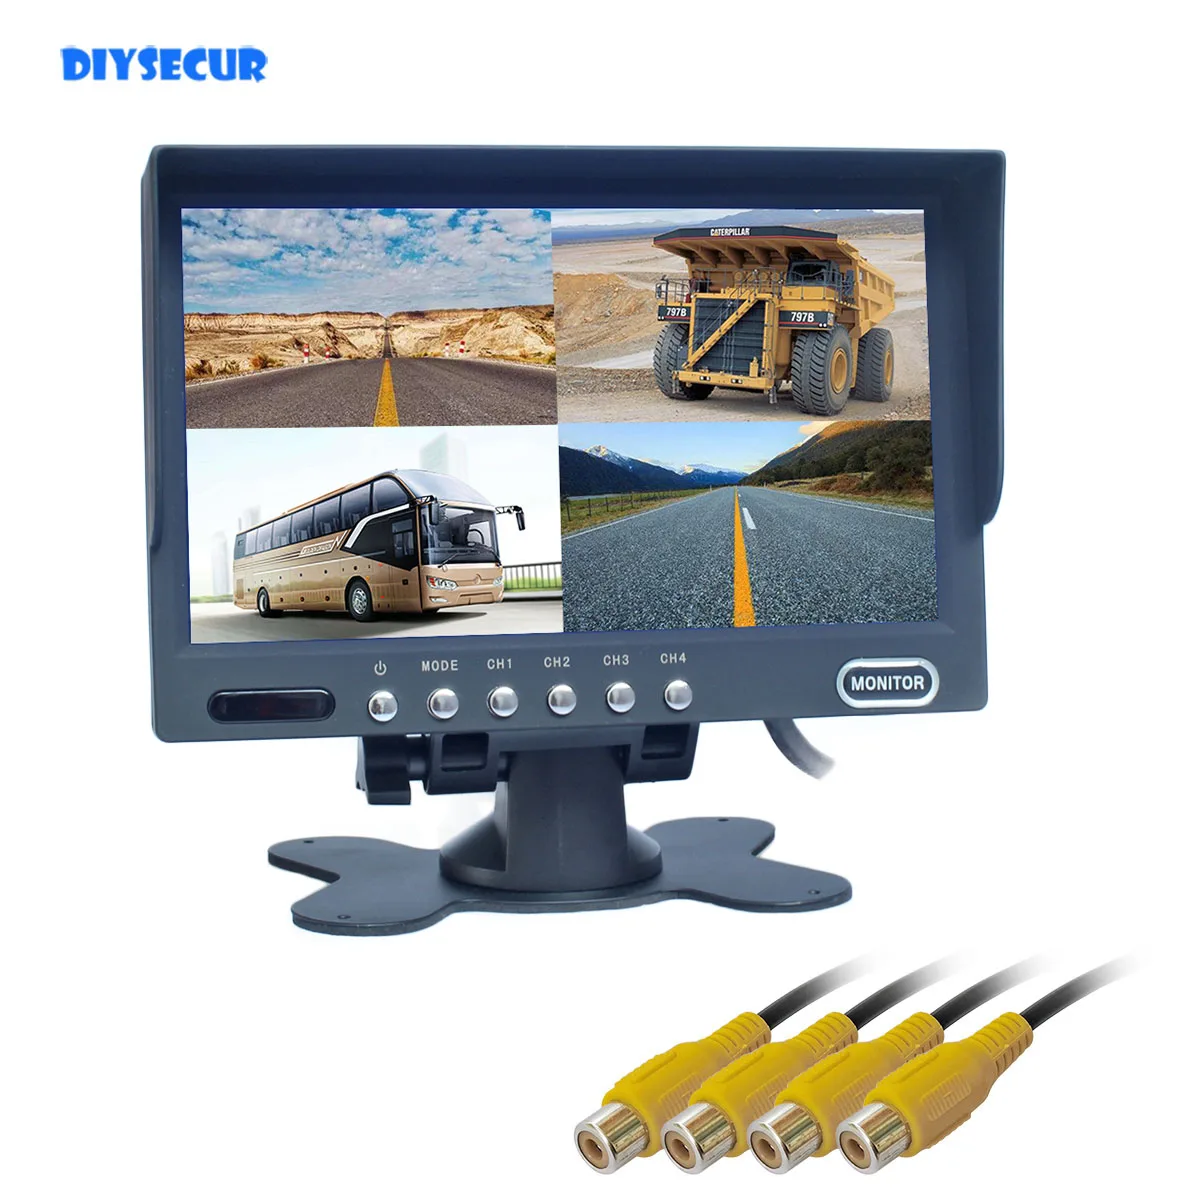 

DIYSECUR Quality 7" 4 Split Quad Display Color Rear View Monitor for Car Truck Bus Reversing Camera Monitoring System